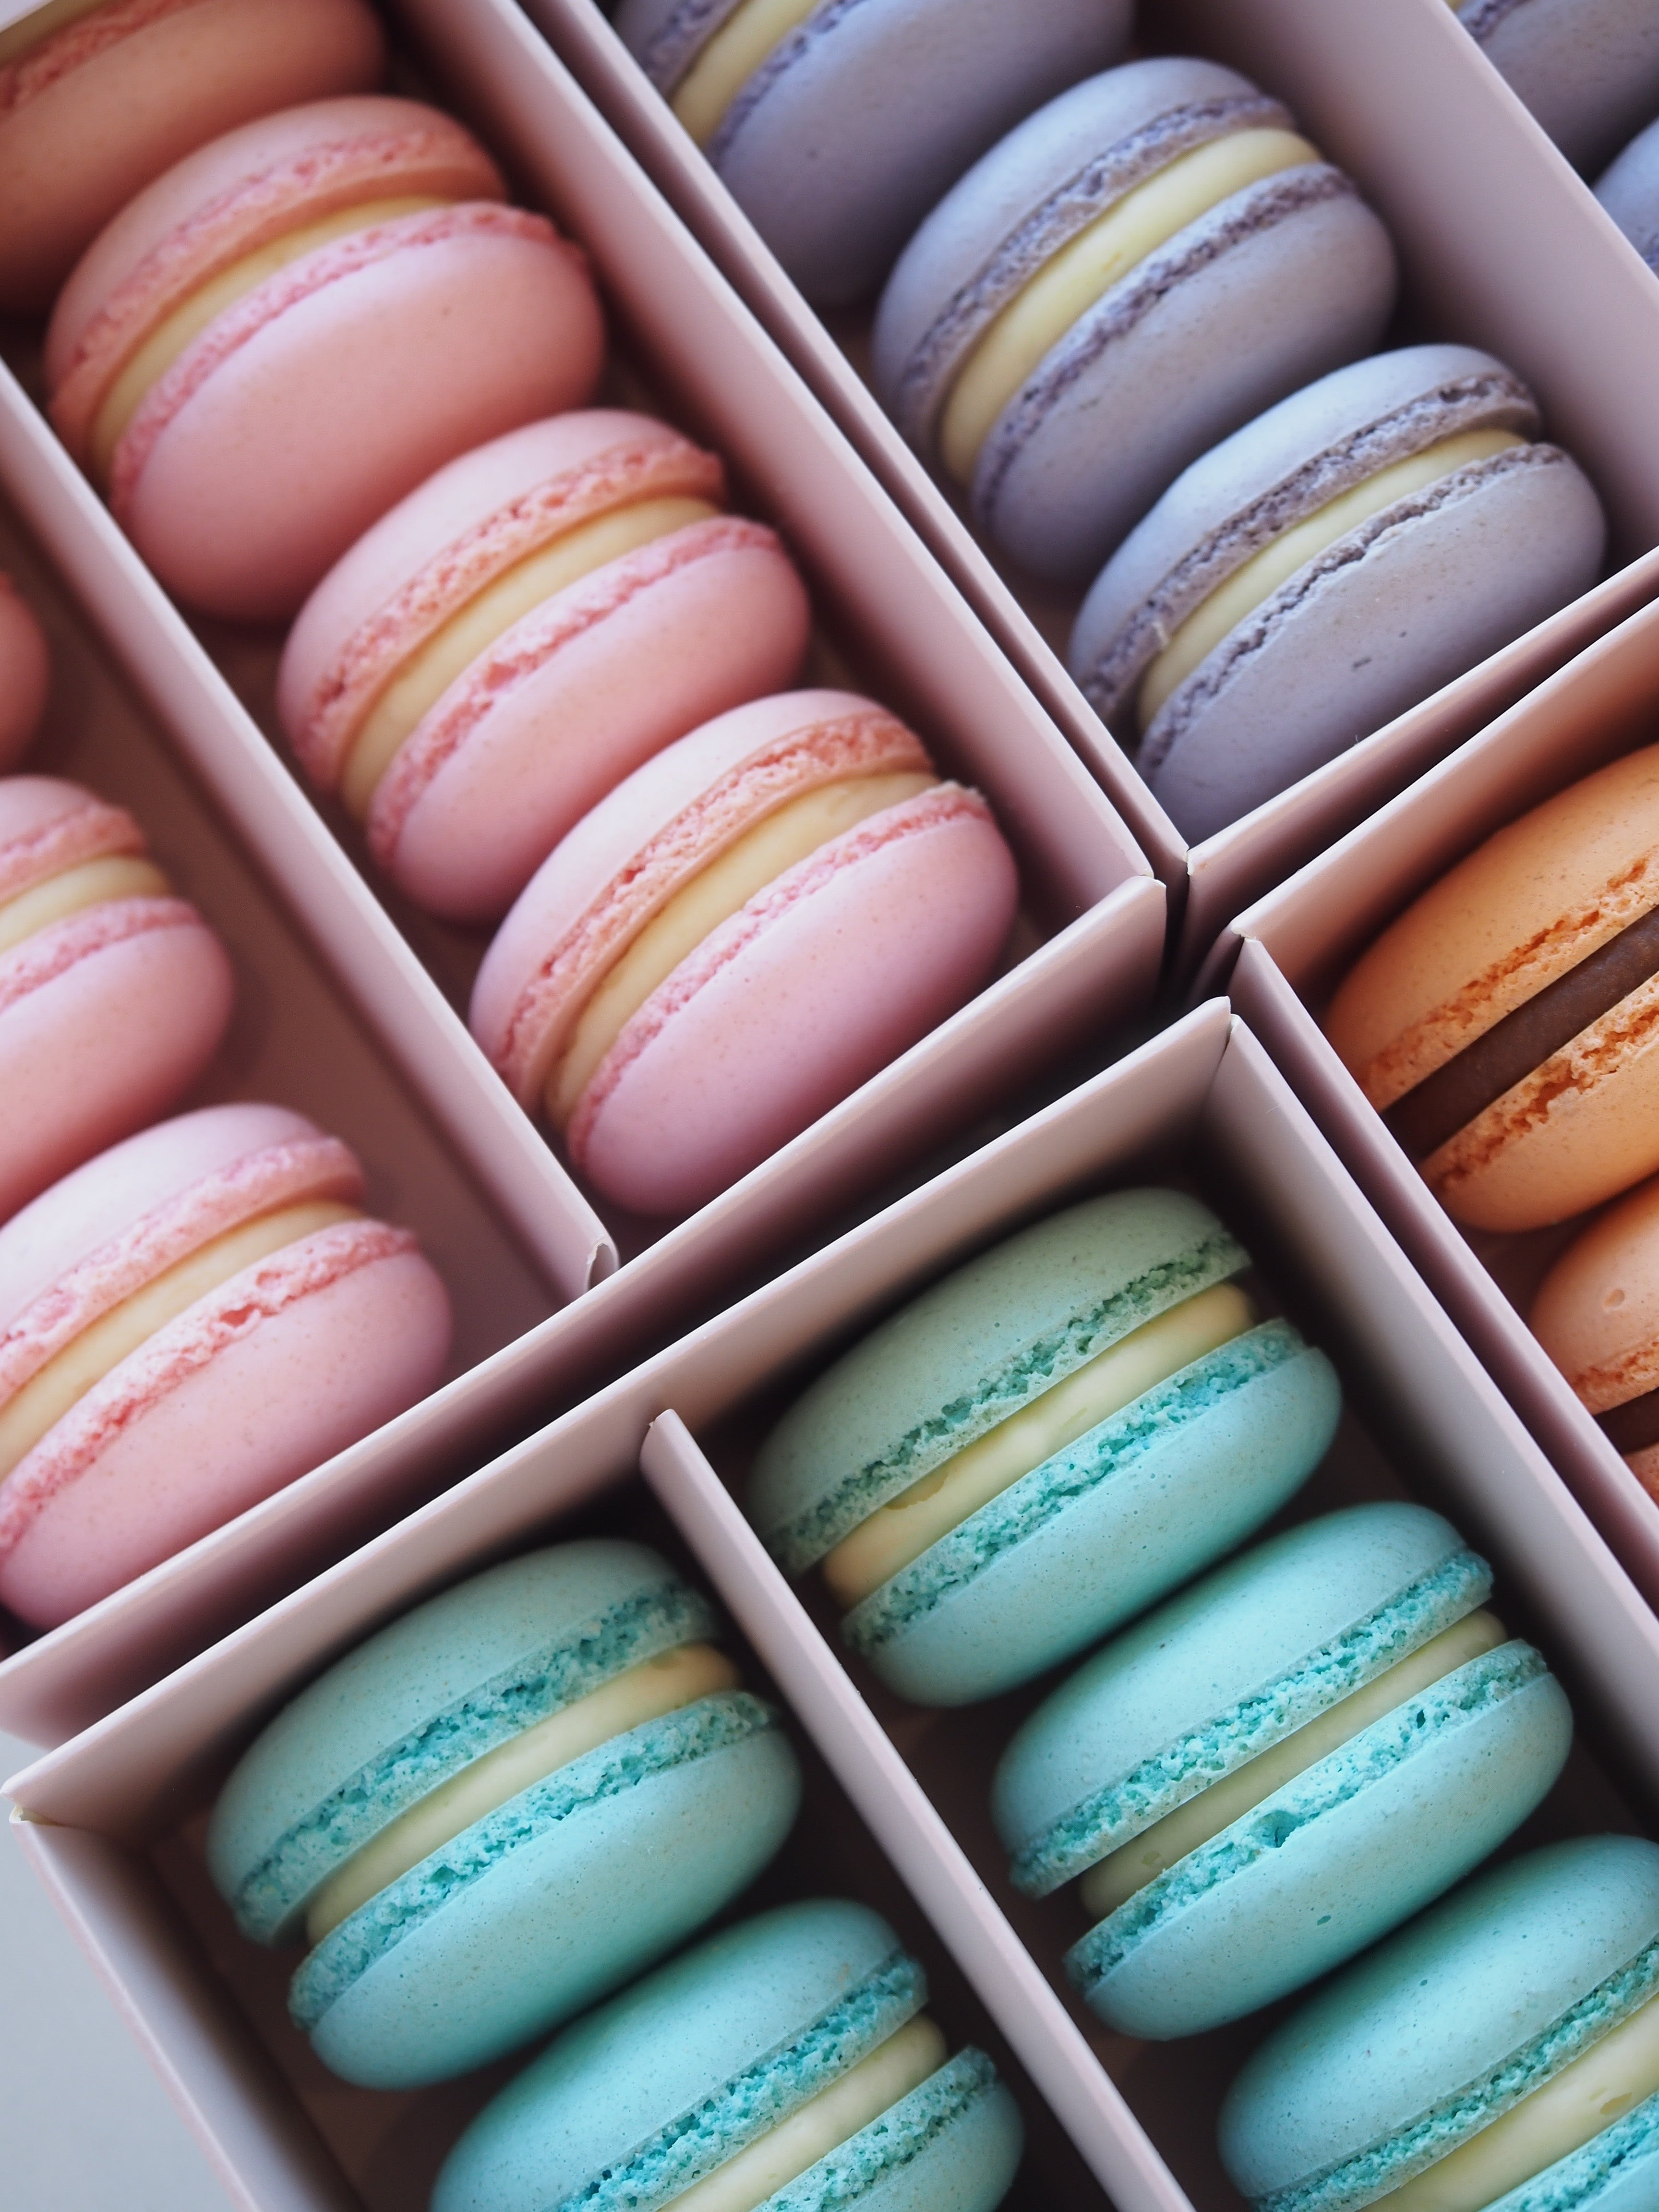 Download wallpaper 1125x2436 bunch of macaron, food, portrait, sweets,  iphone x, 1125x2436 hd background, 7134